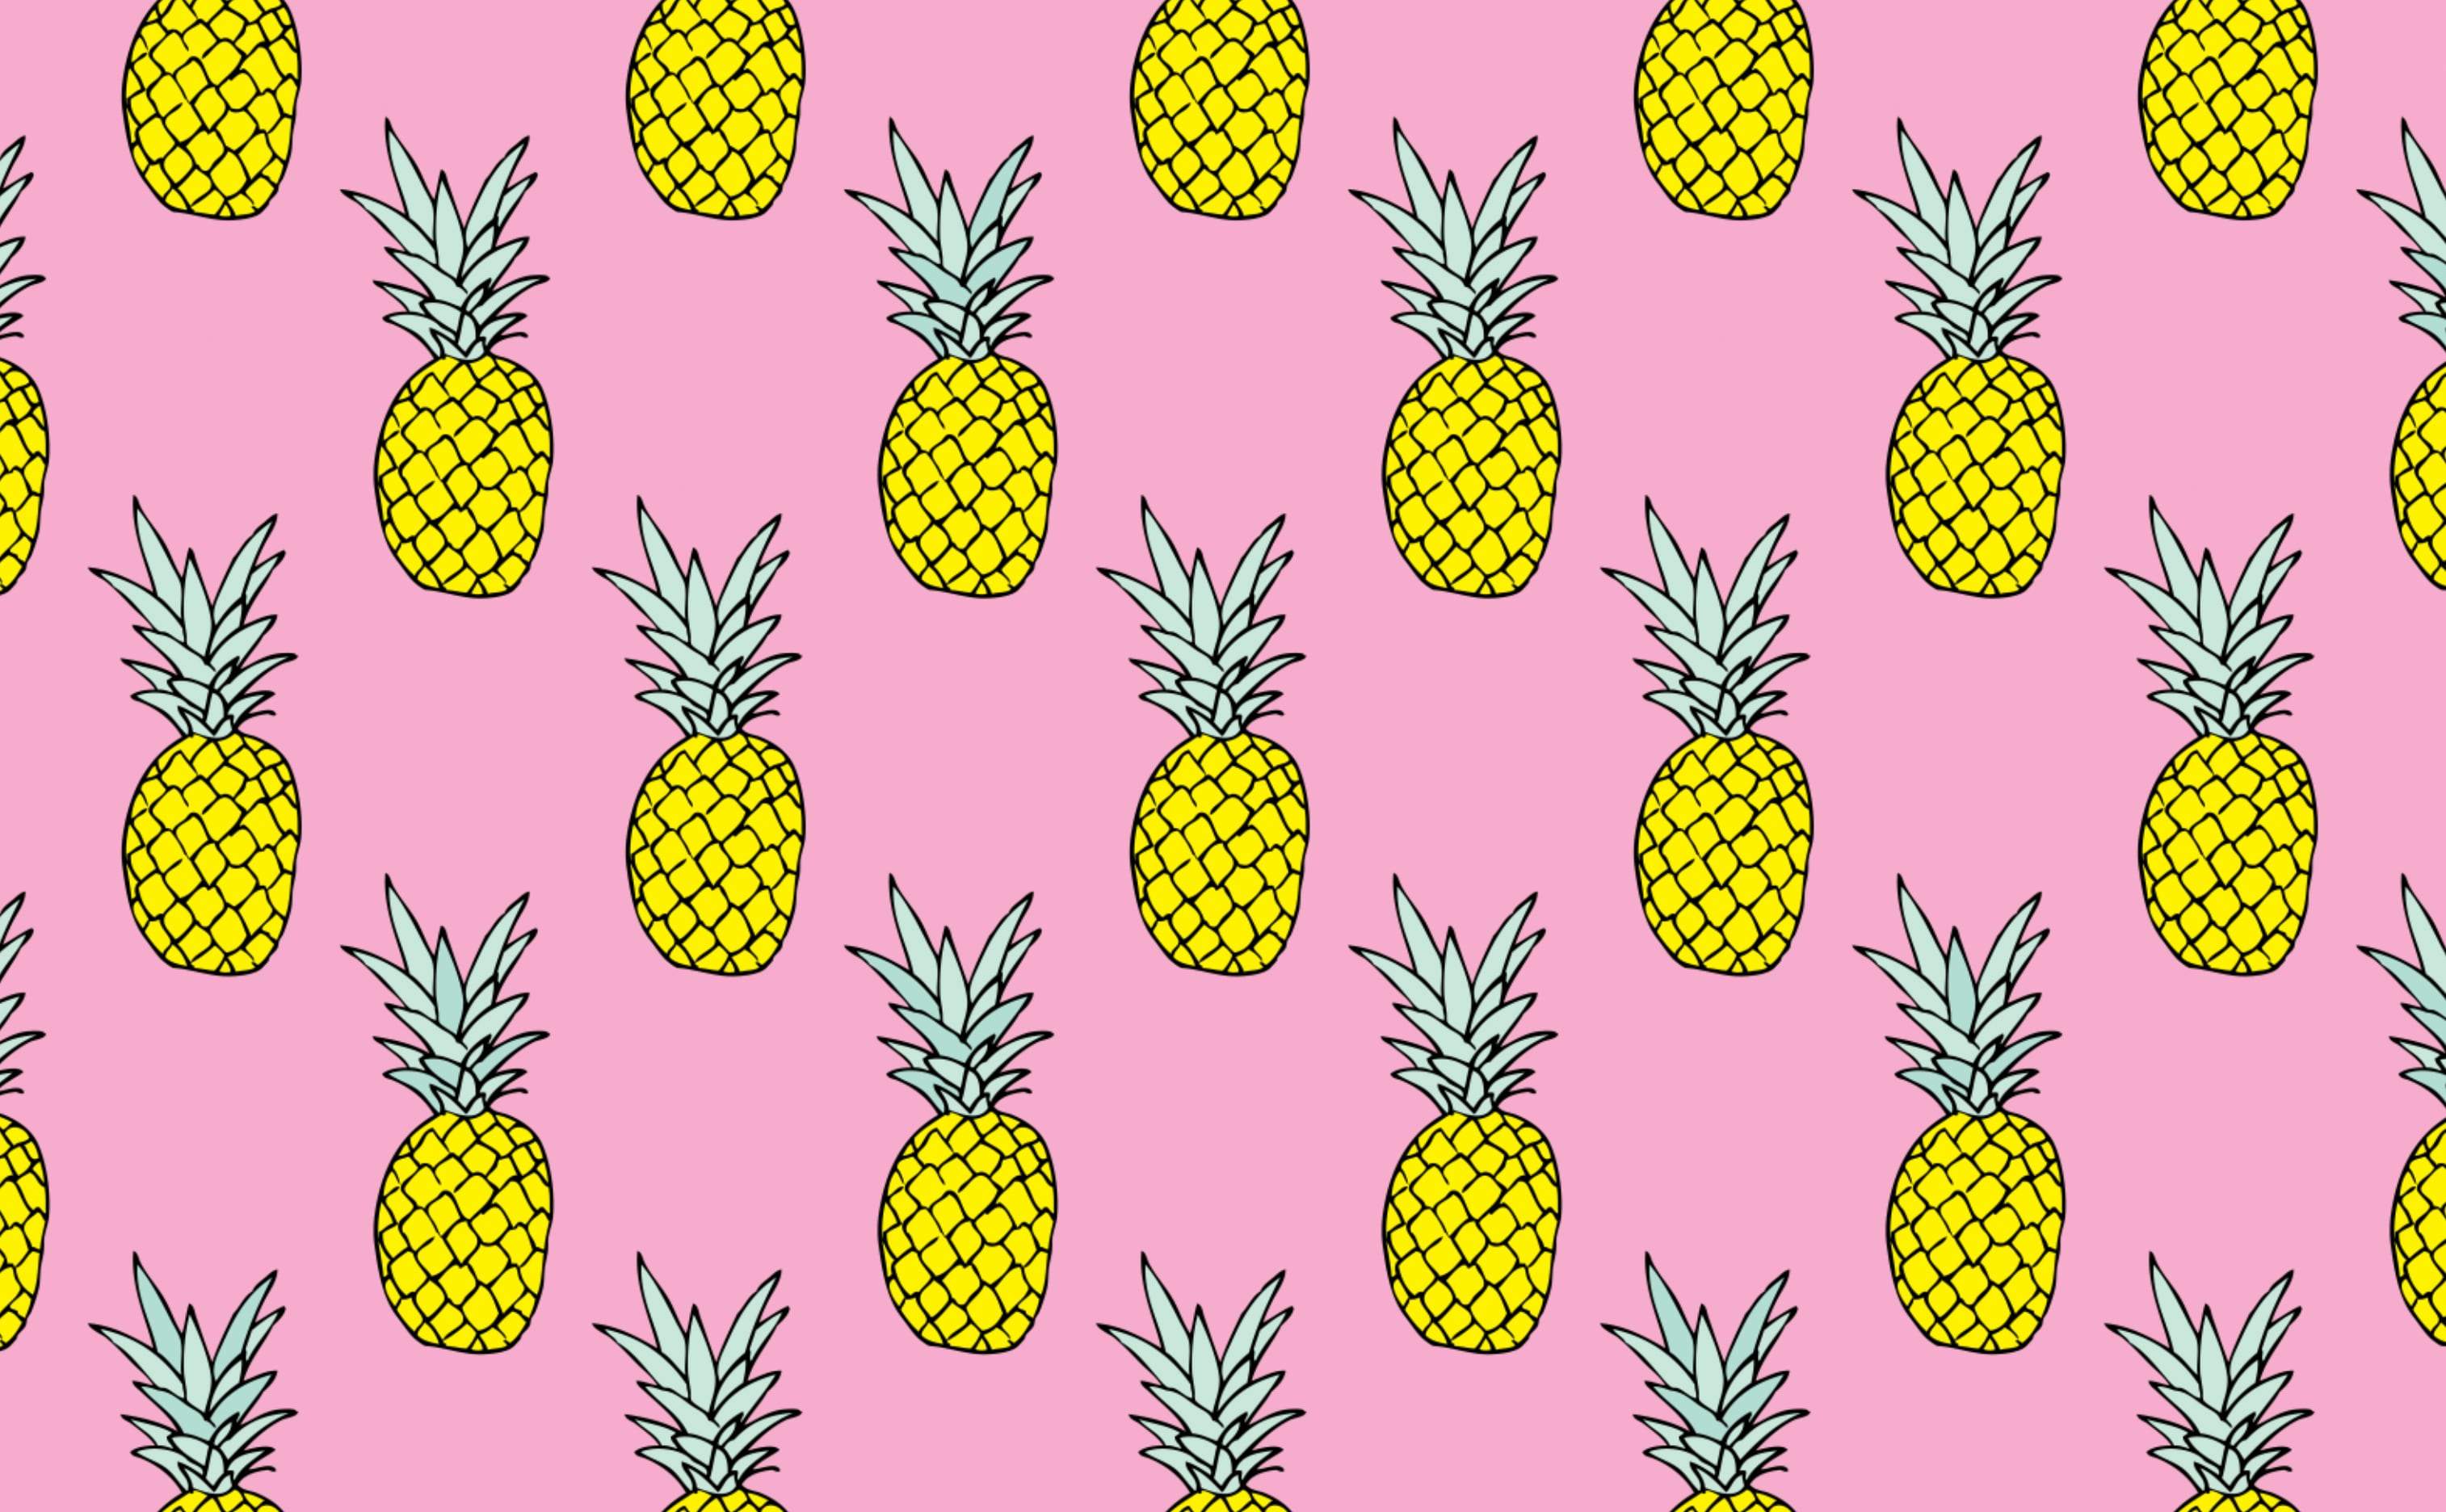 Pineapple HD Wallpapers 1000 Free Pineapple Wallpaper Images For All  Devices